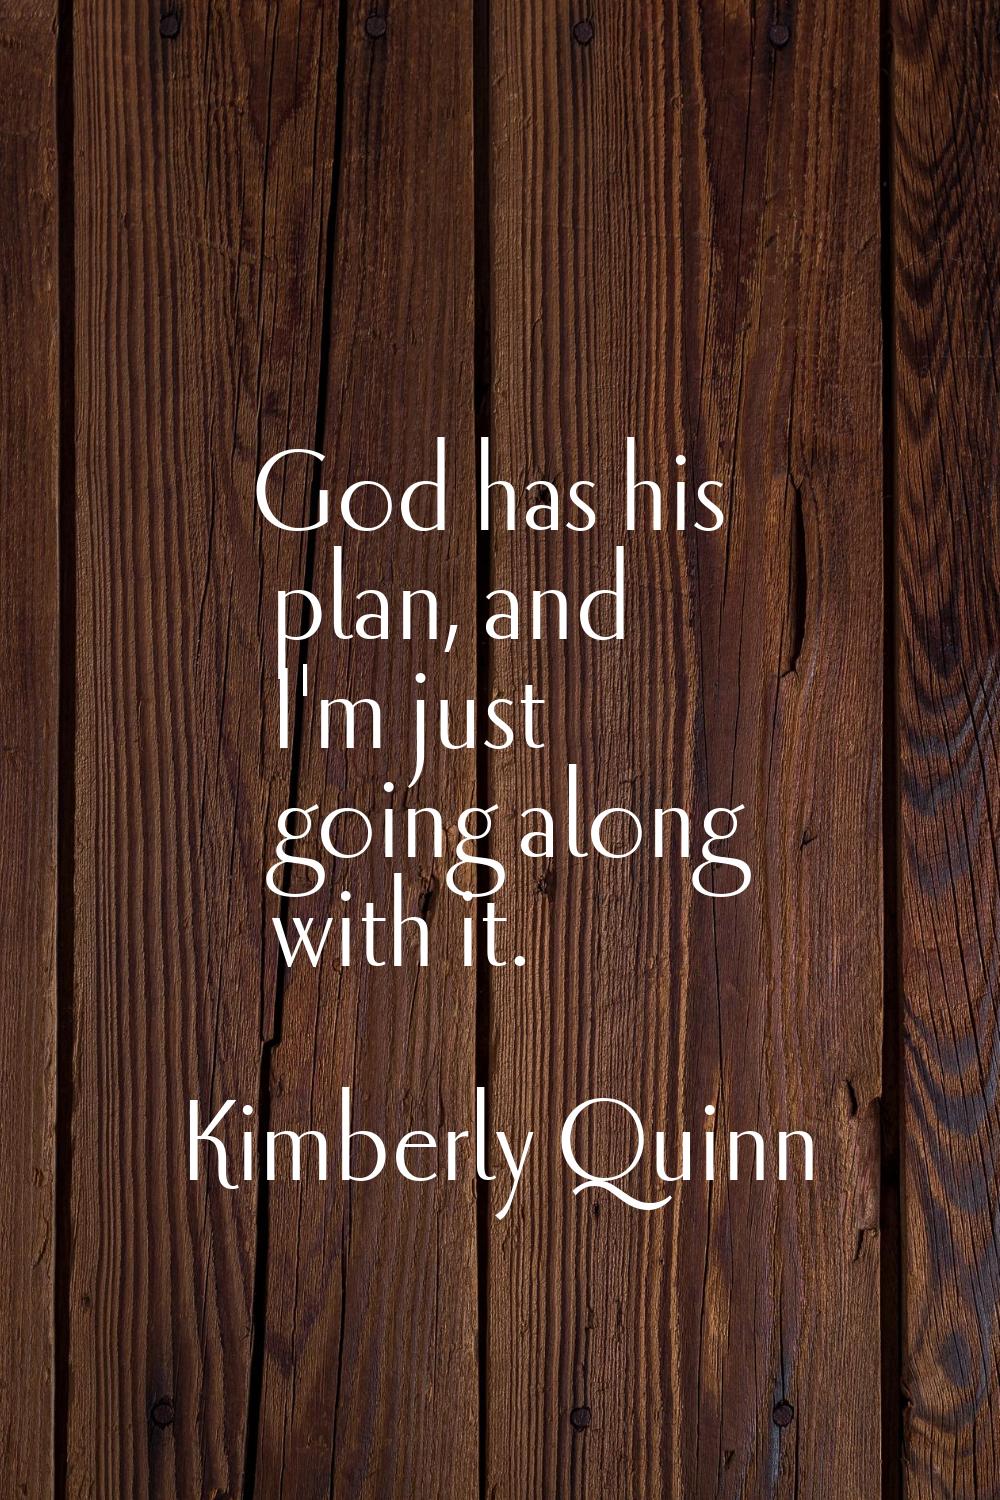 God has his plan, and I'm just going along with it.